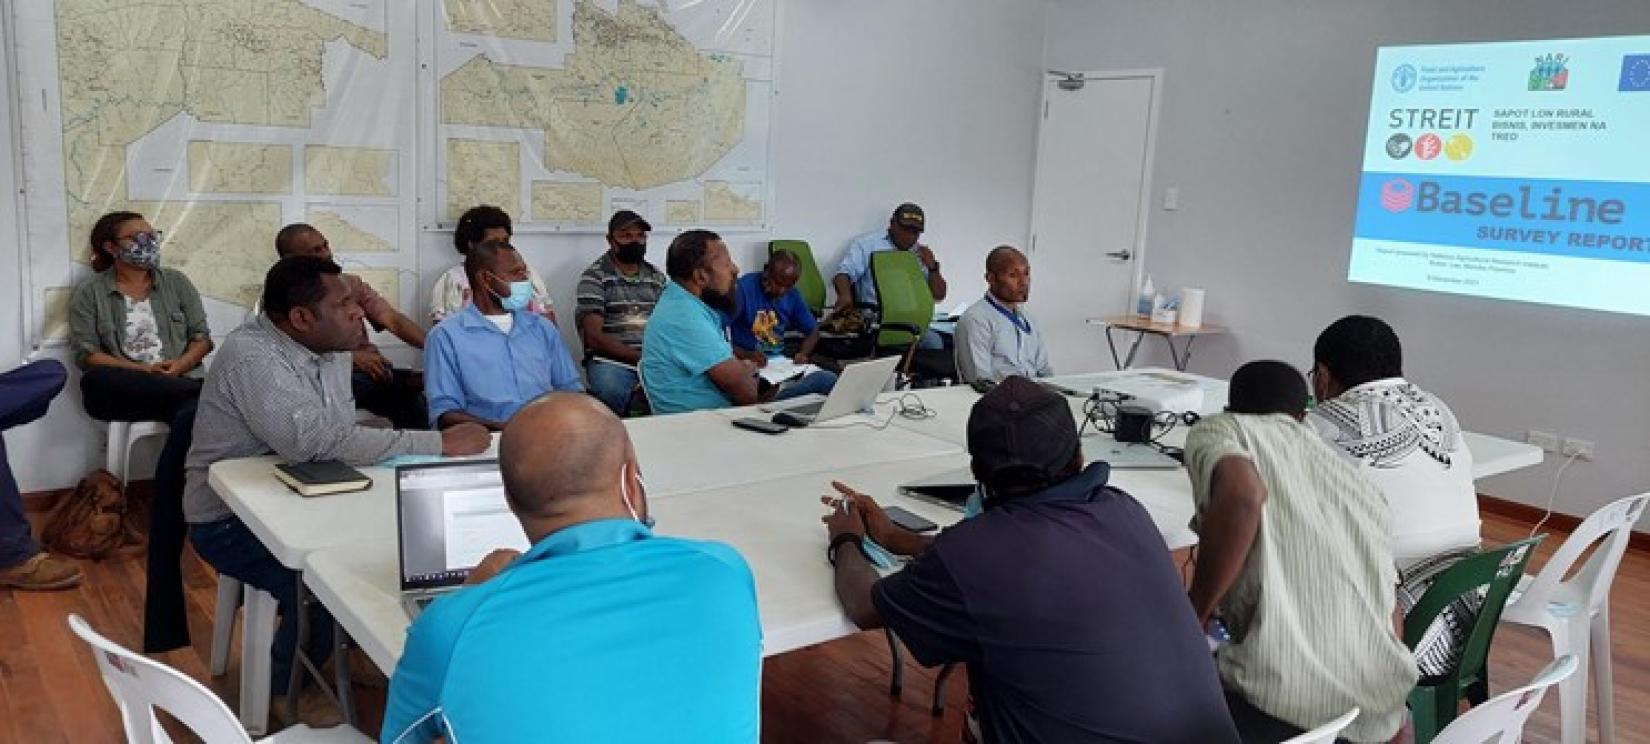 Validation Workshop held at the EU-STREIT PNG Programme’s Office in Wewak, East Sepik Province. Papua New Guinea.